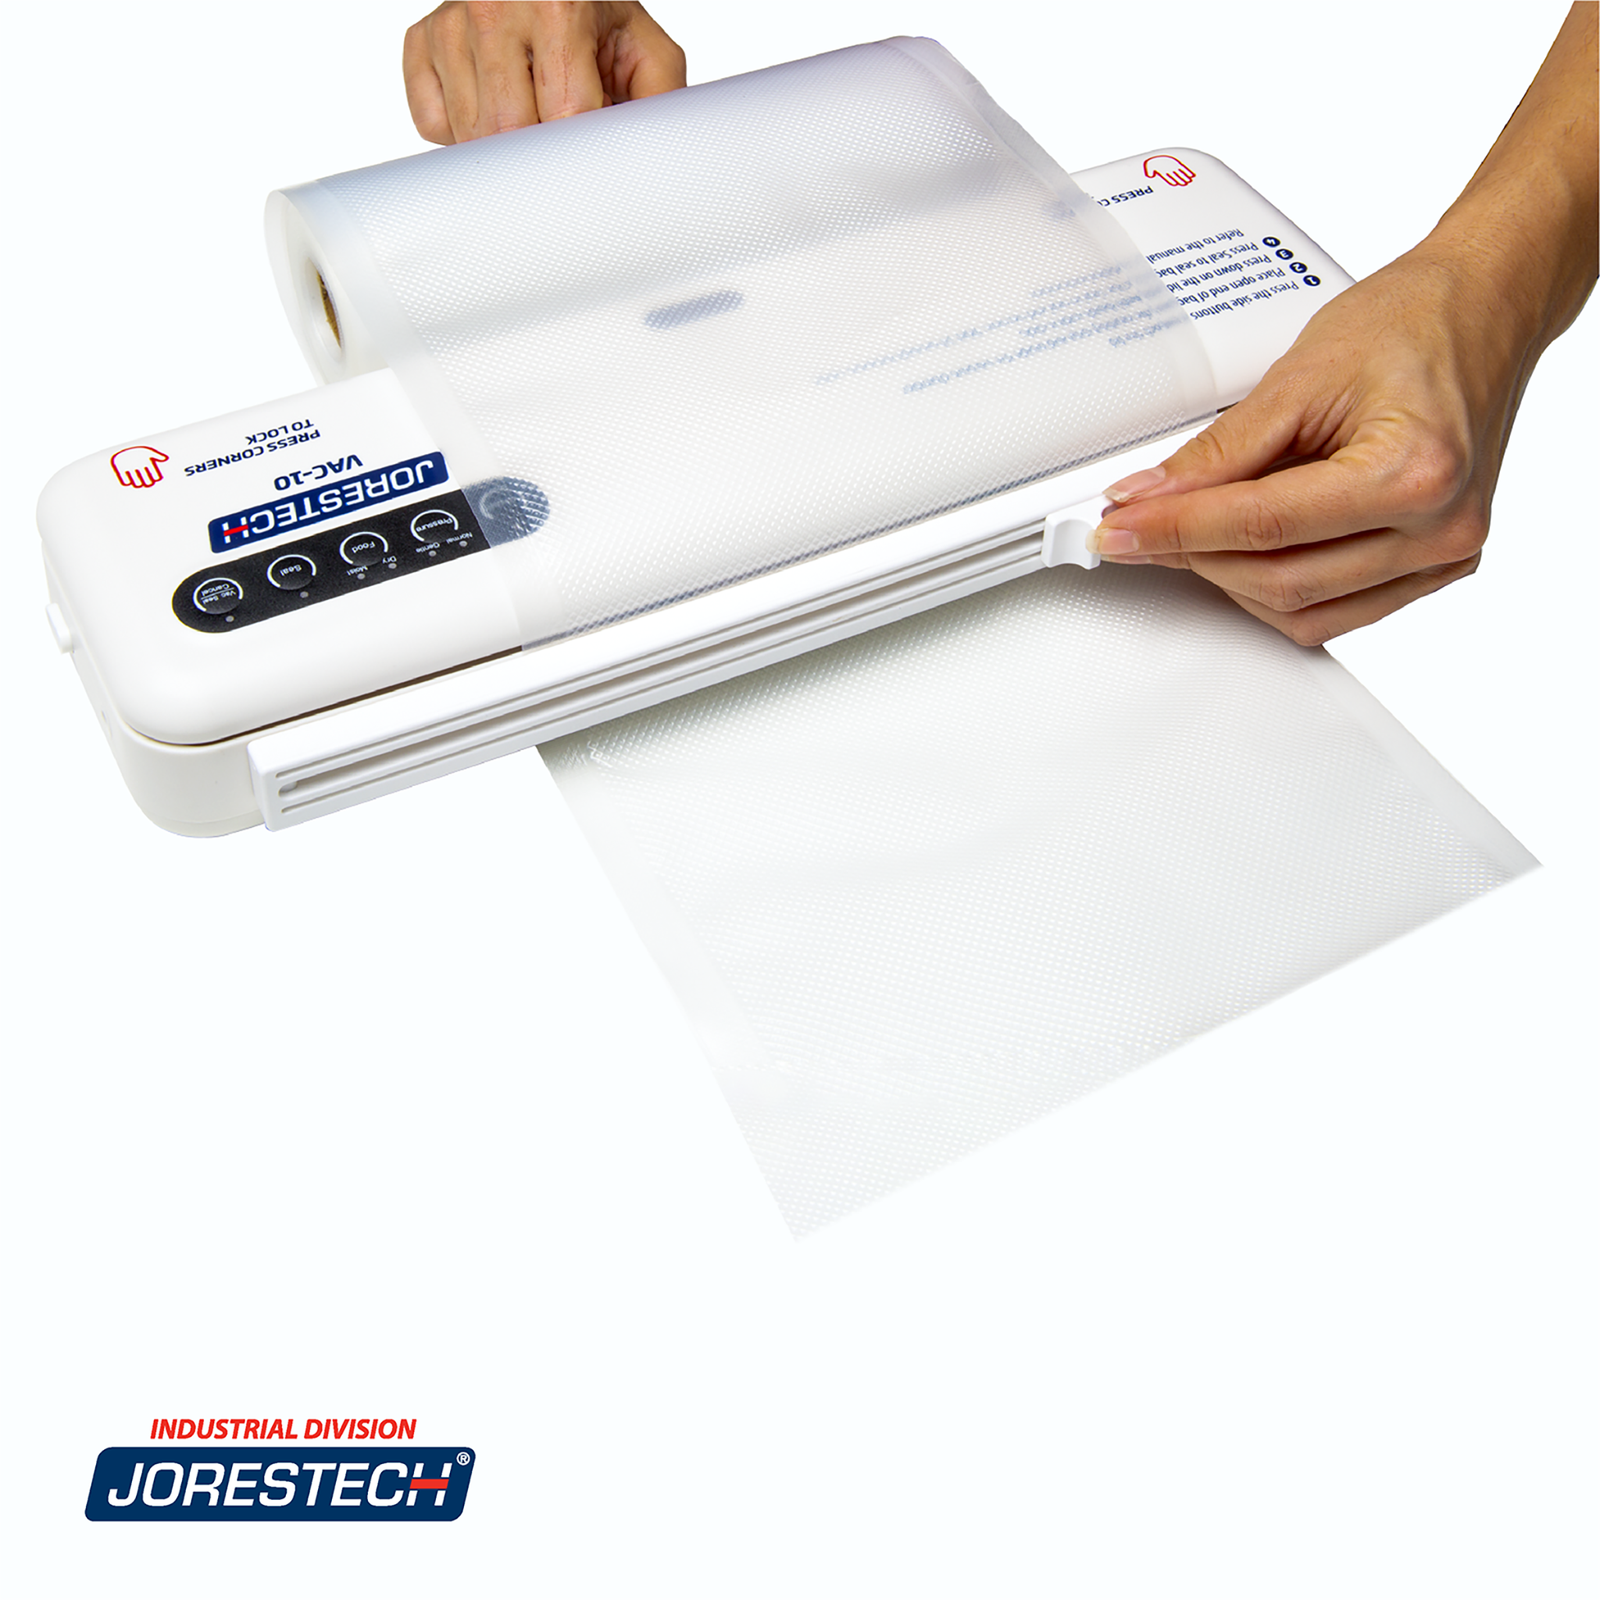 A person's hands can be seen using the bag cutter on the back of a JORES TECHNOLOGIES®  tabletop vacuum sealer for home use in order to make their own custom-sized bags. 